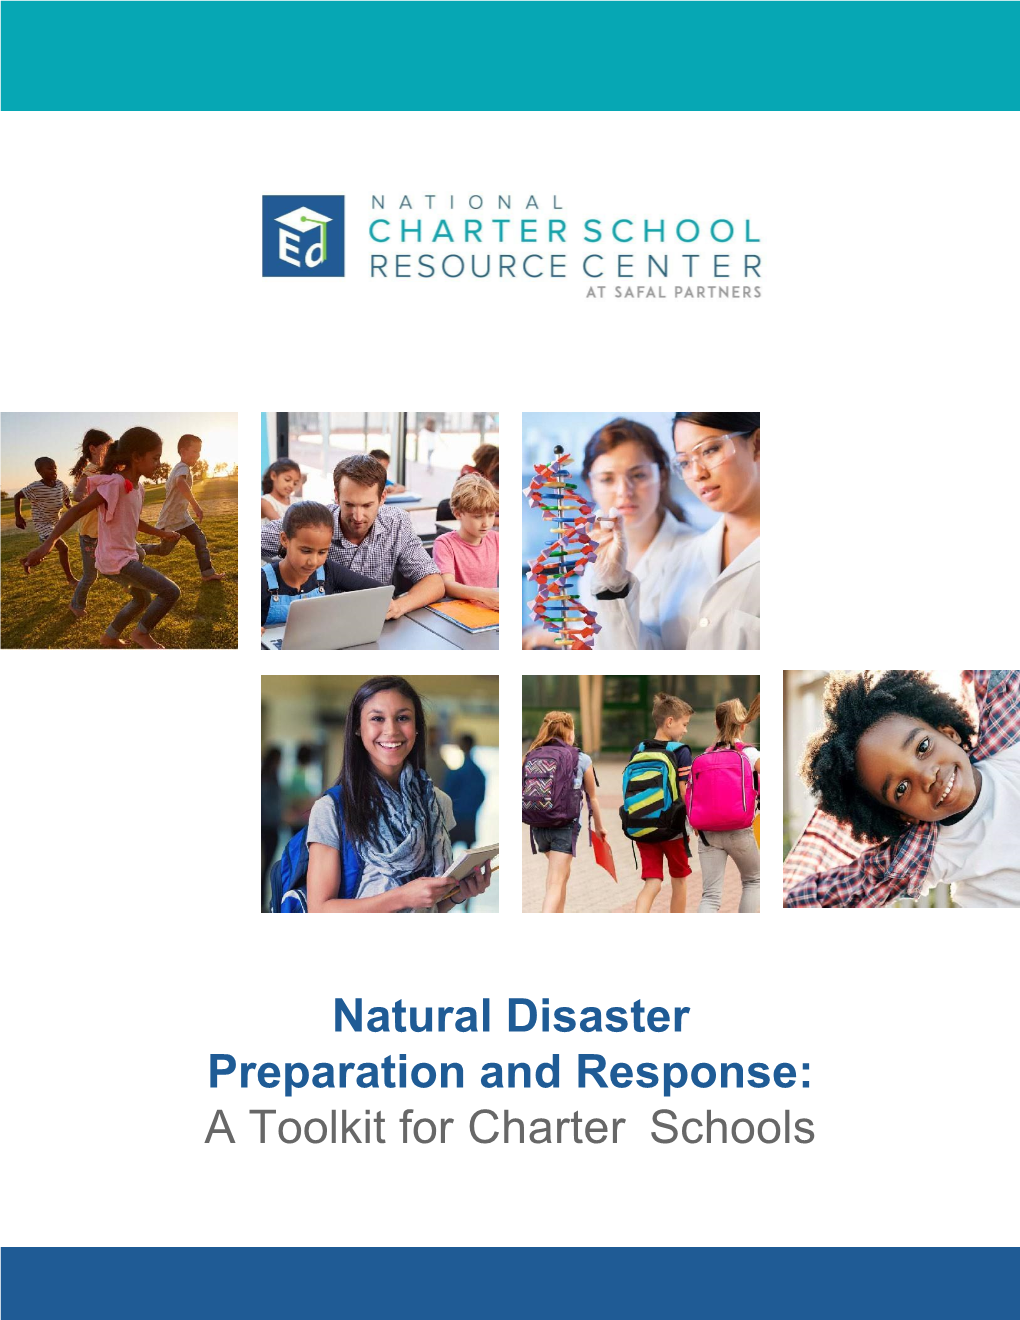 Natural Disaster Preparation and Response: a Toolkit for Charter Schools